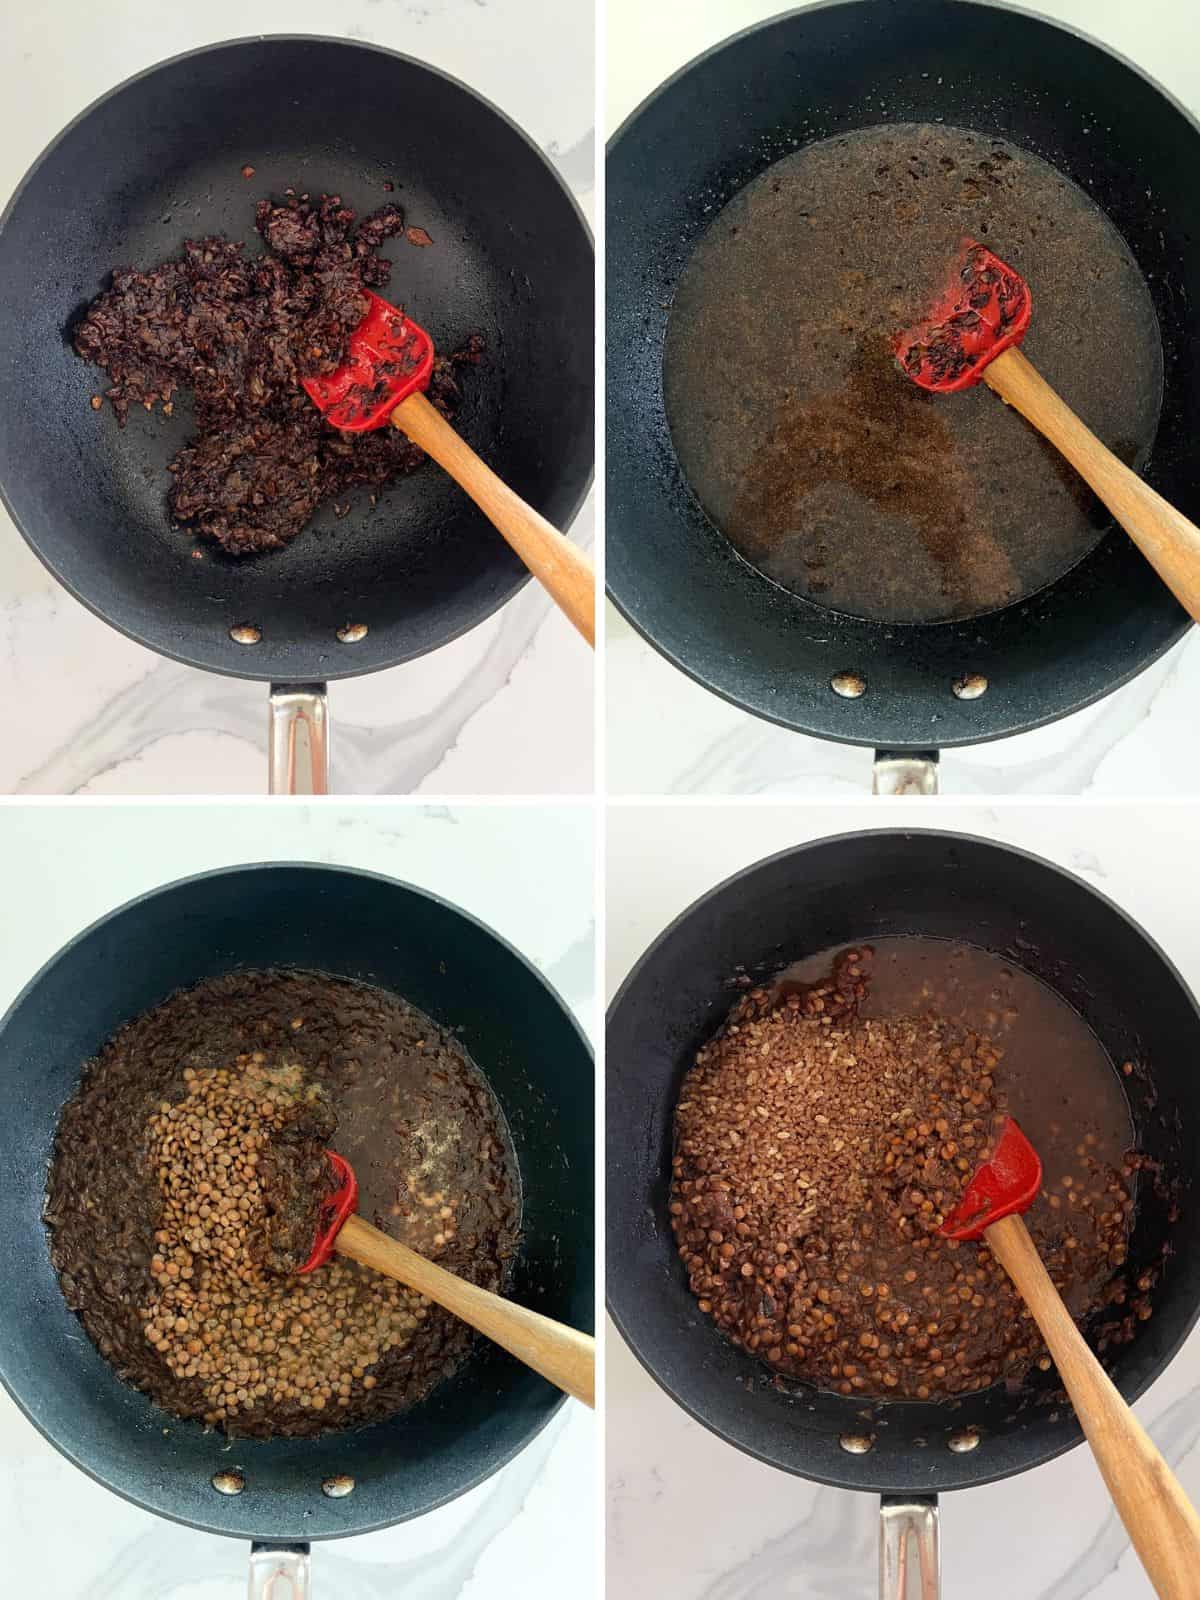 four images showing how to make mujadara hamra in a pot, simmering onion, lentils and bulgur